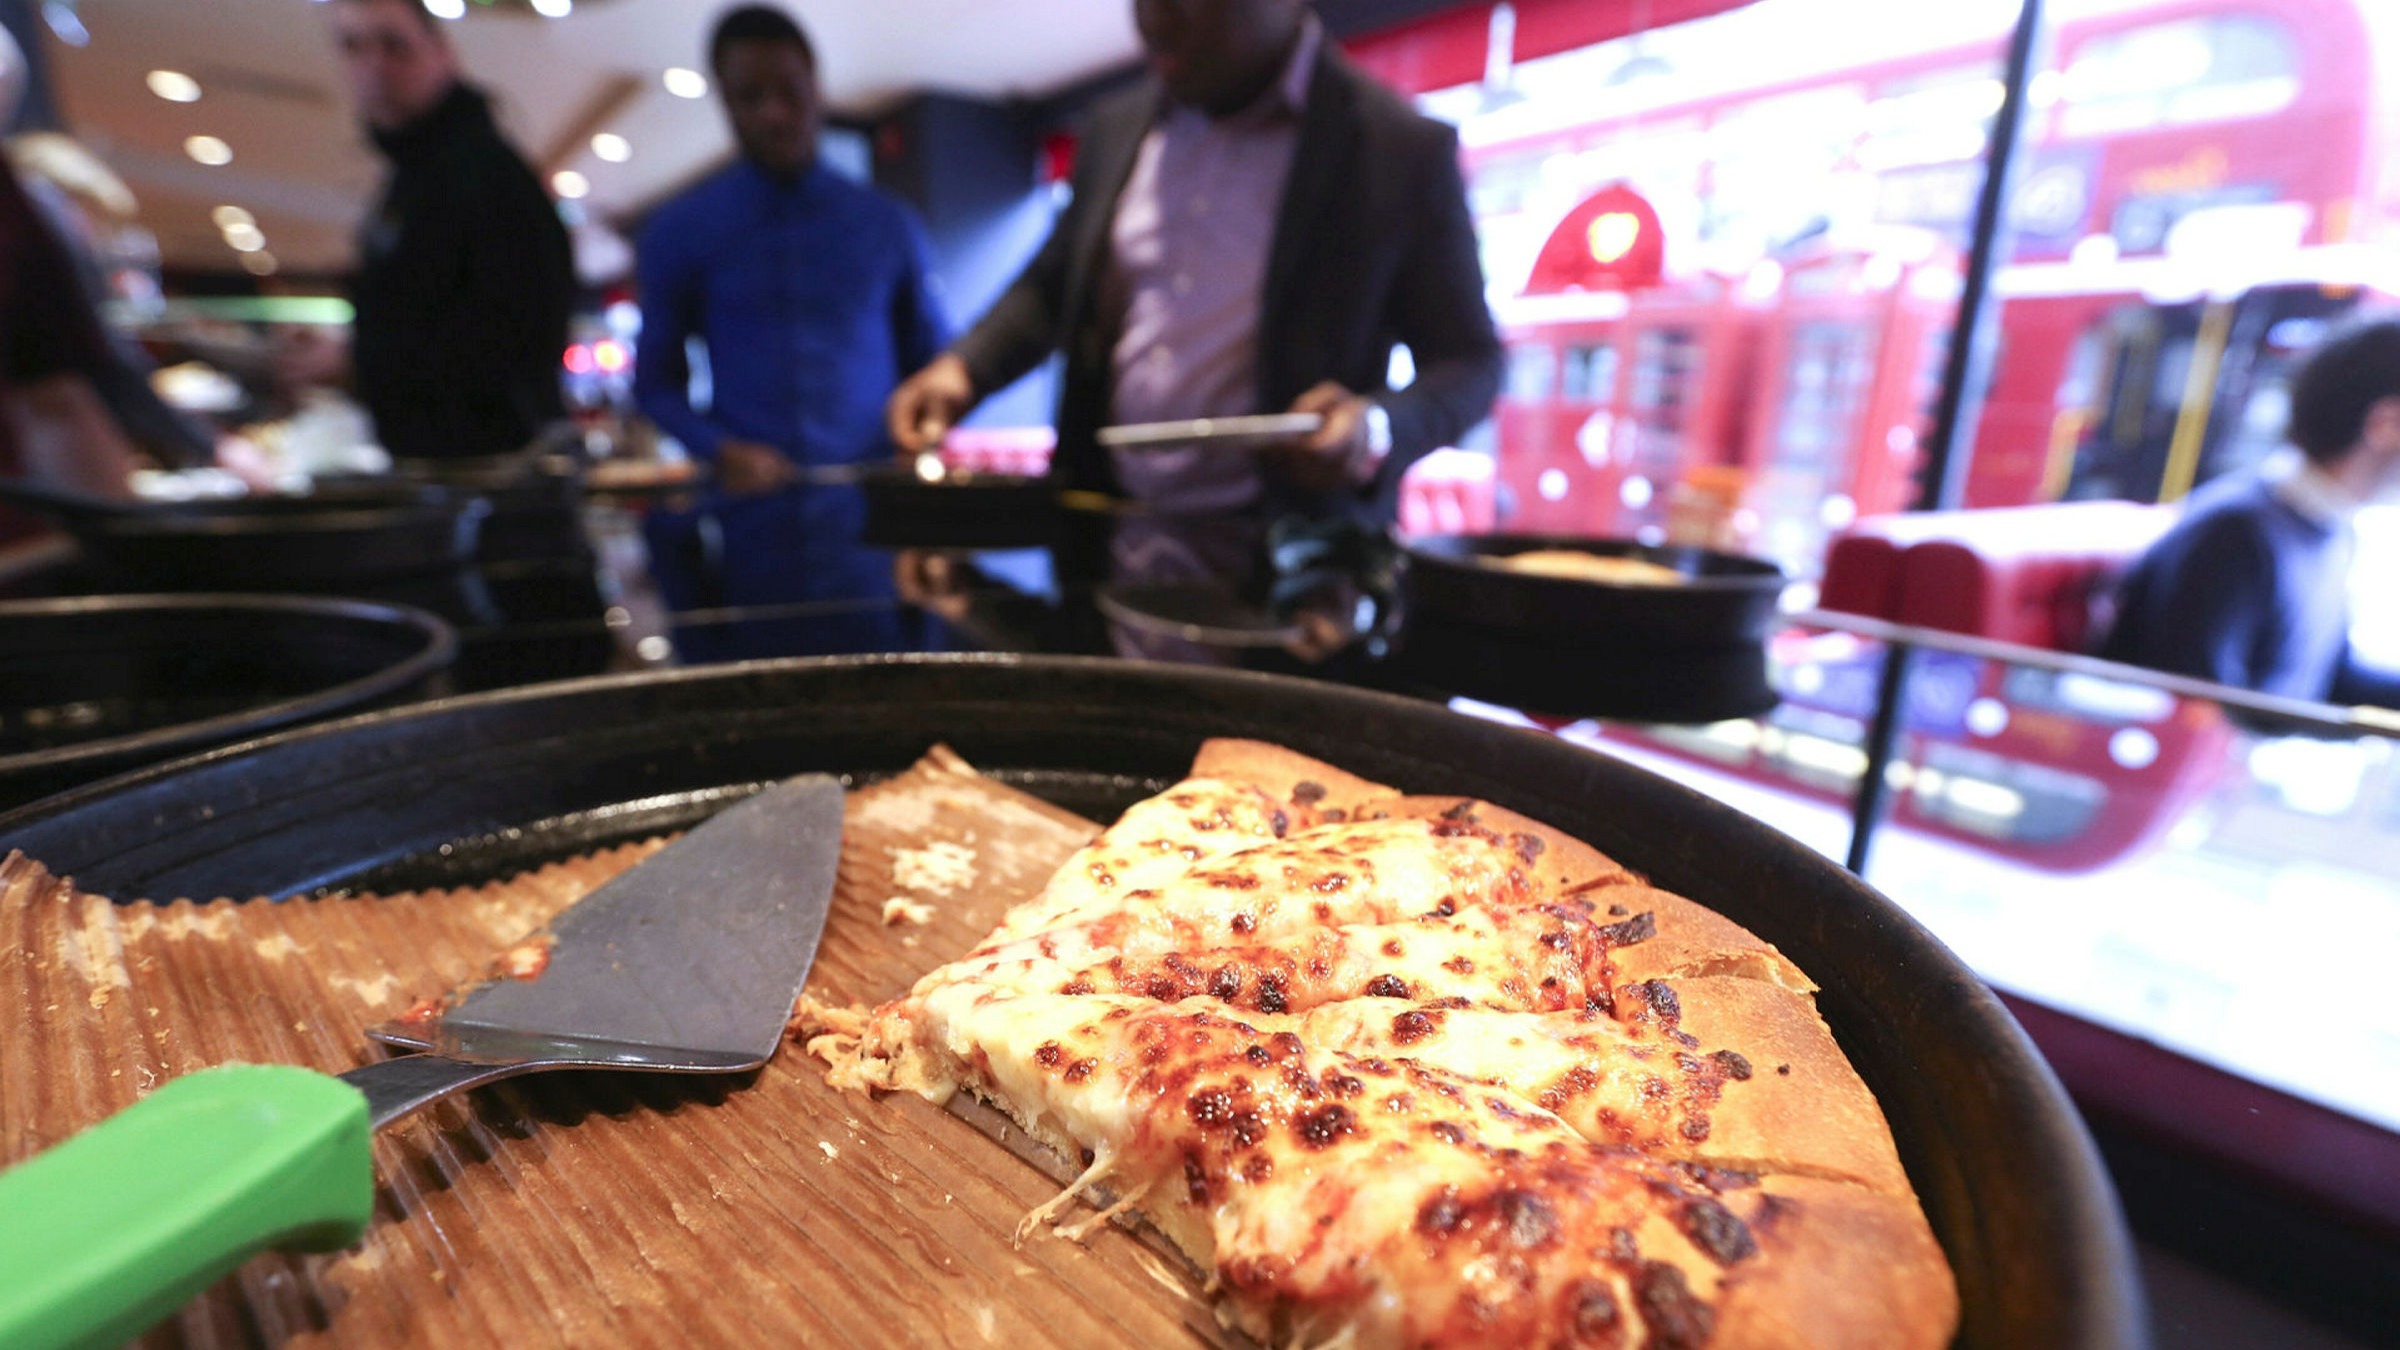 Pizza Hut puts 450 jobs at risk with UK closure plan | Financial Times